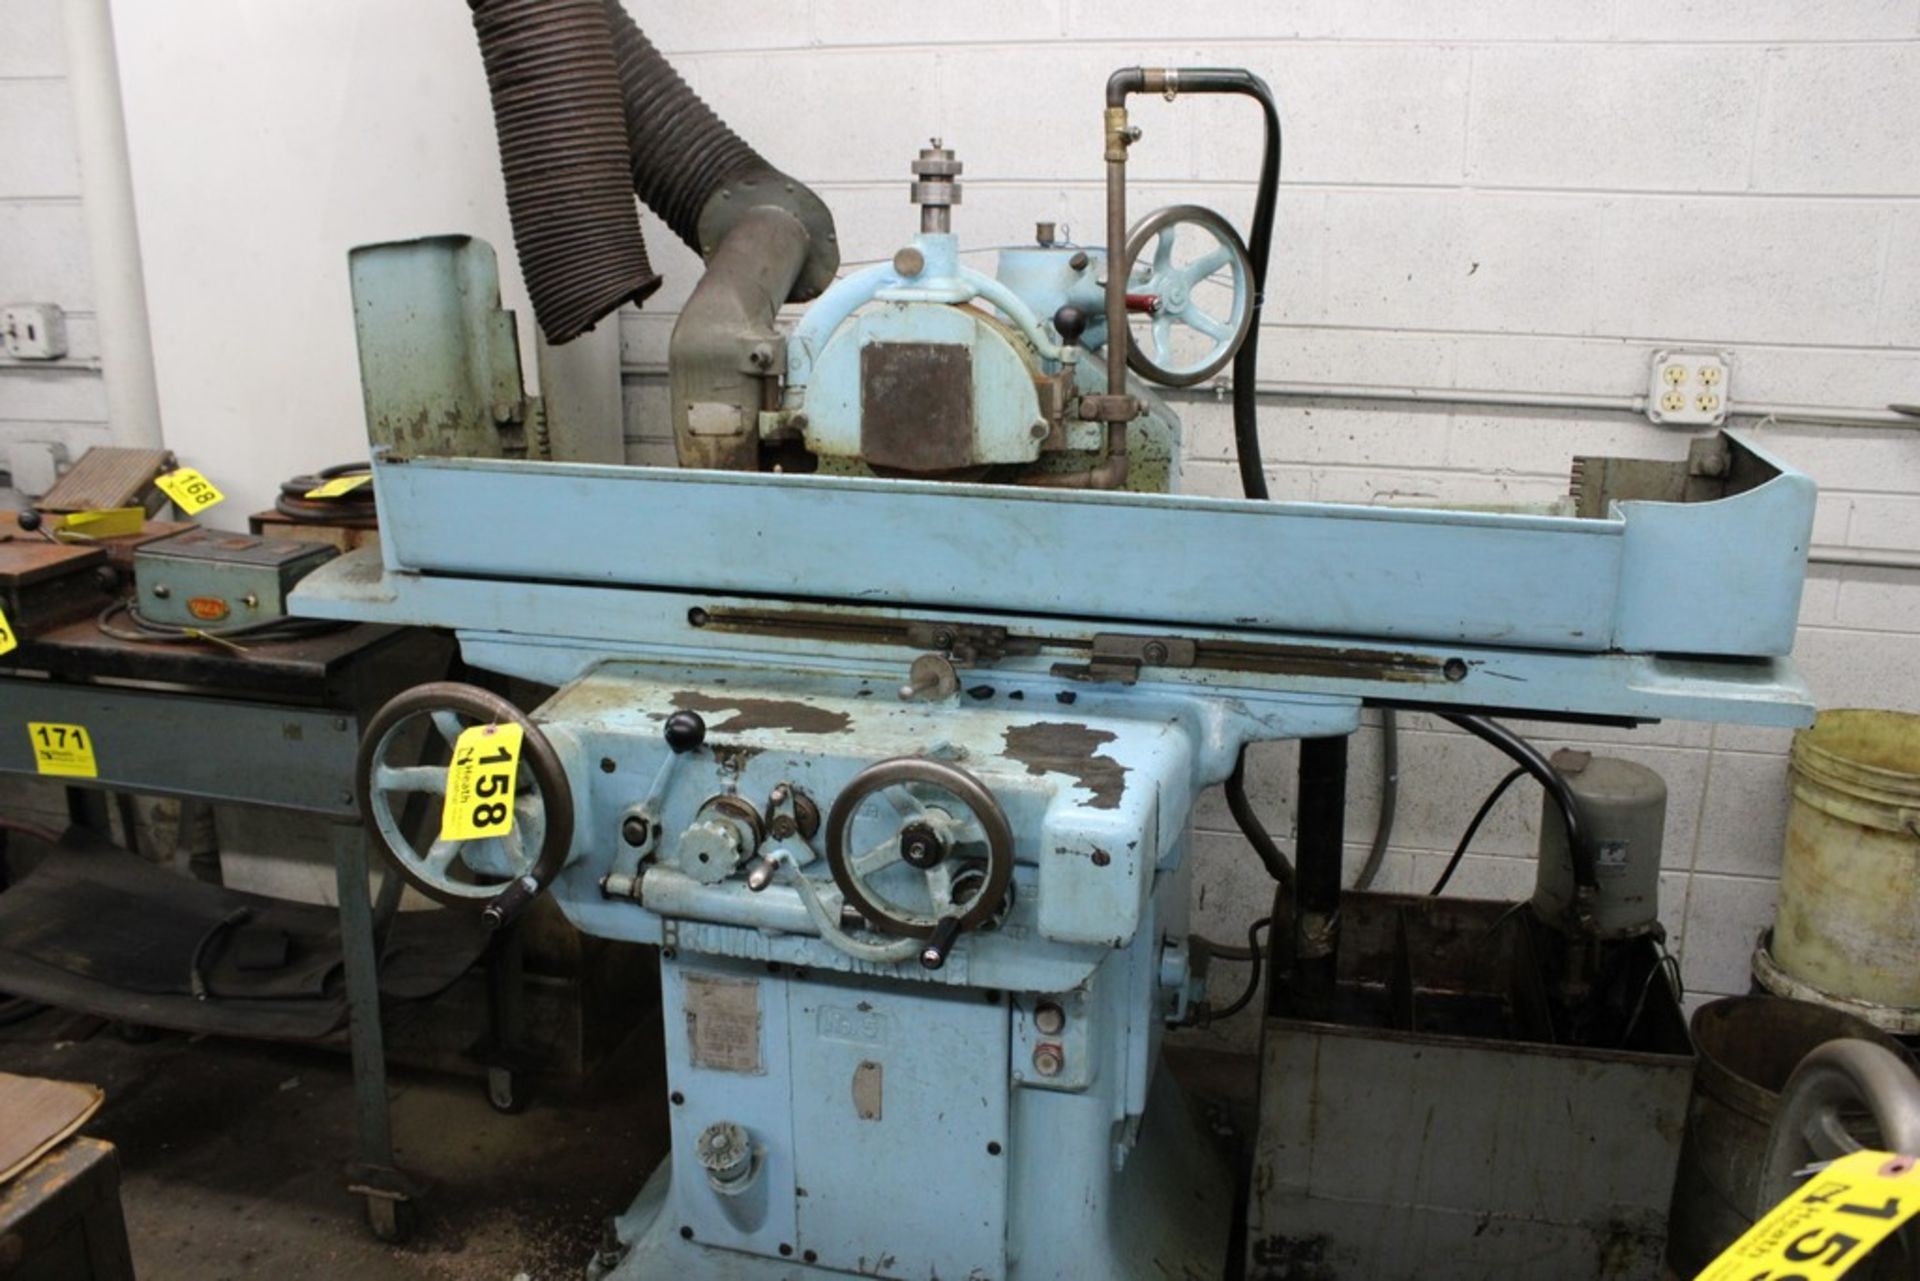 BROWN & SHARPE 8”X24” NO. 5 HYDRAULIC SURFACE GRINDER WITH ELECTRO MAGNETIC CHUCK - Image 5 of 5